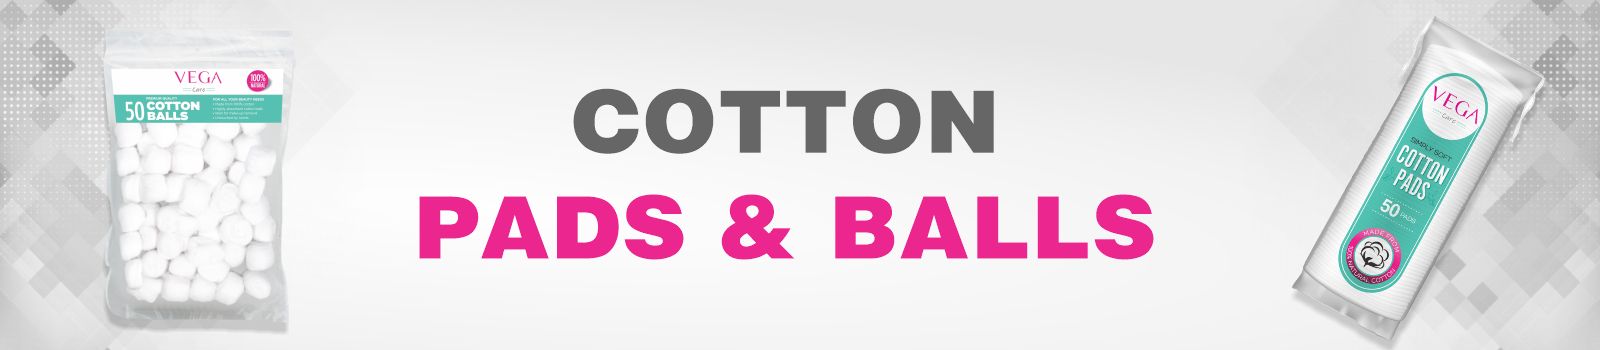 Cotton Pads and Balls